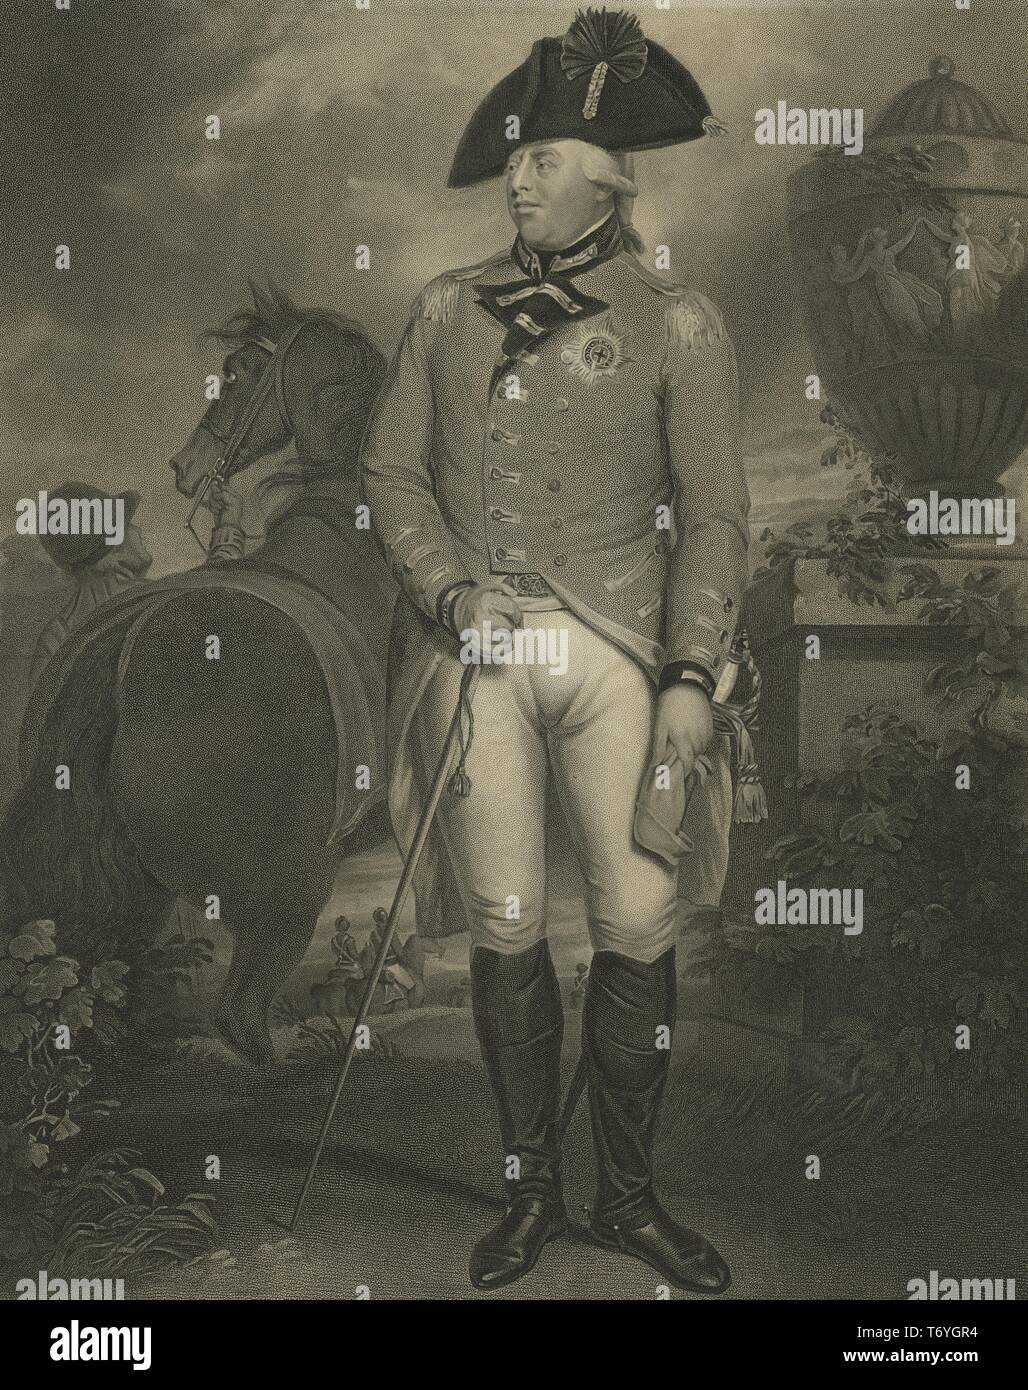 Engraved portrait of George III of the United Kingdom, King of the United Kingdom of Great Britain and Ireland, 1800. From the New York Public Library. () Stock Photo